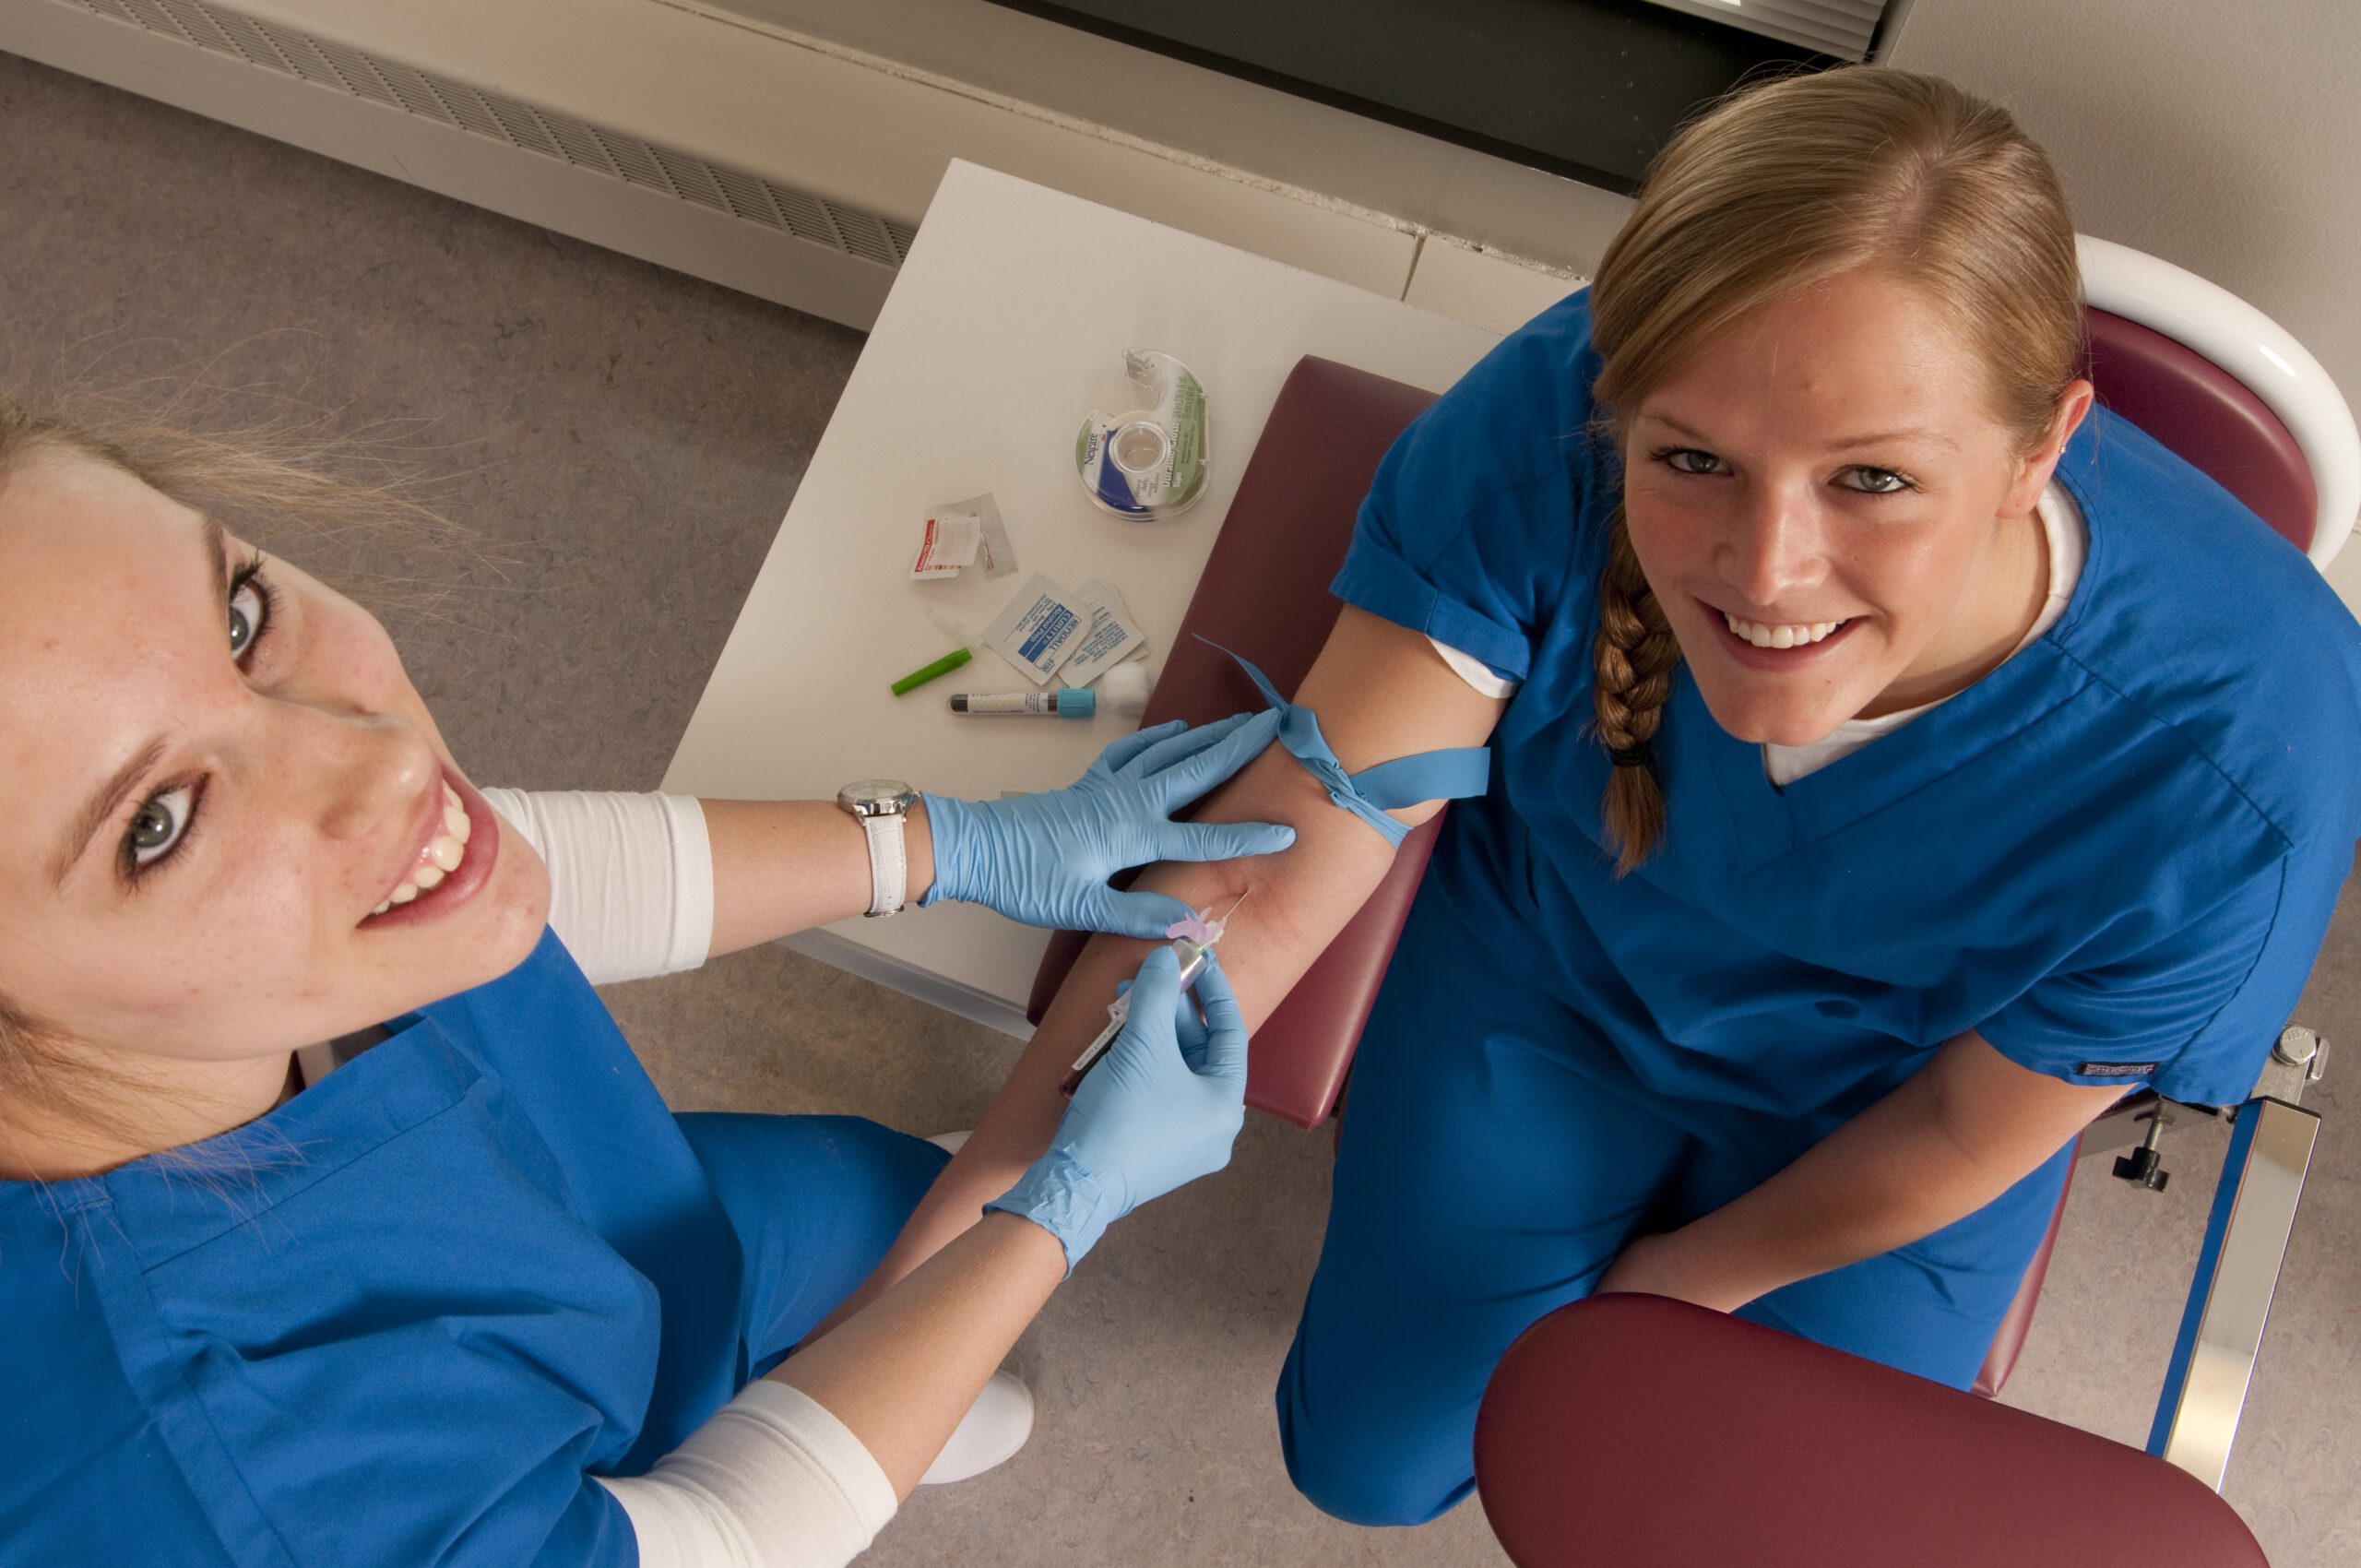 NHS Phlebotomy Training Course Certification in London